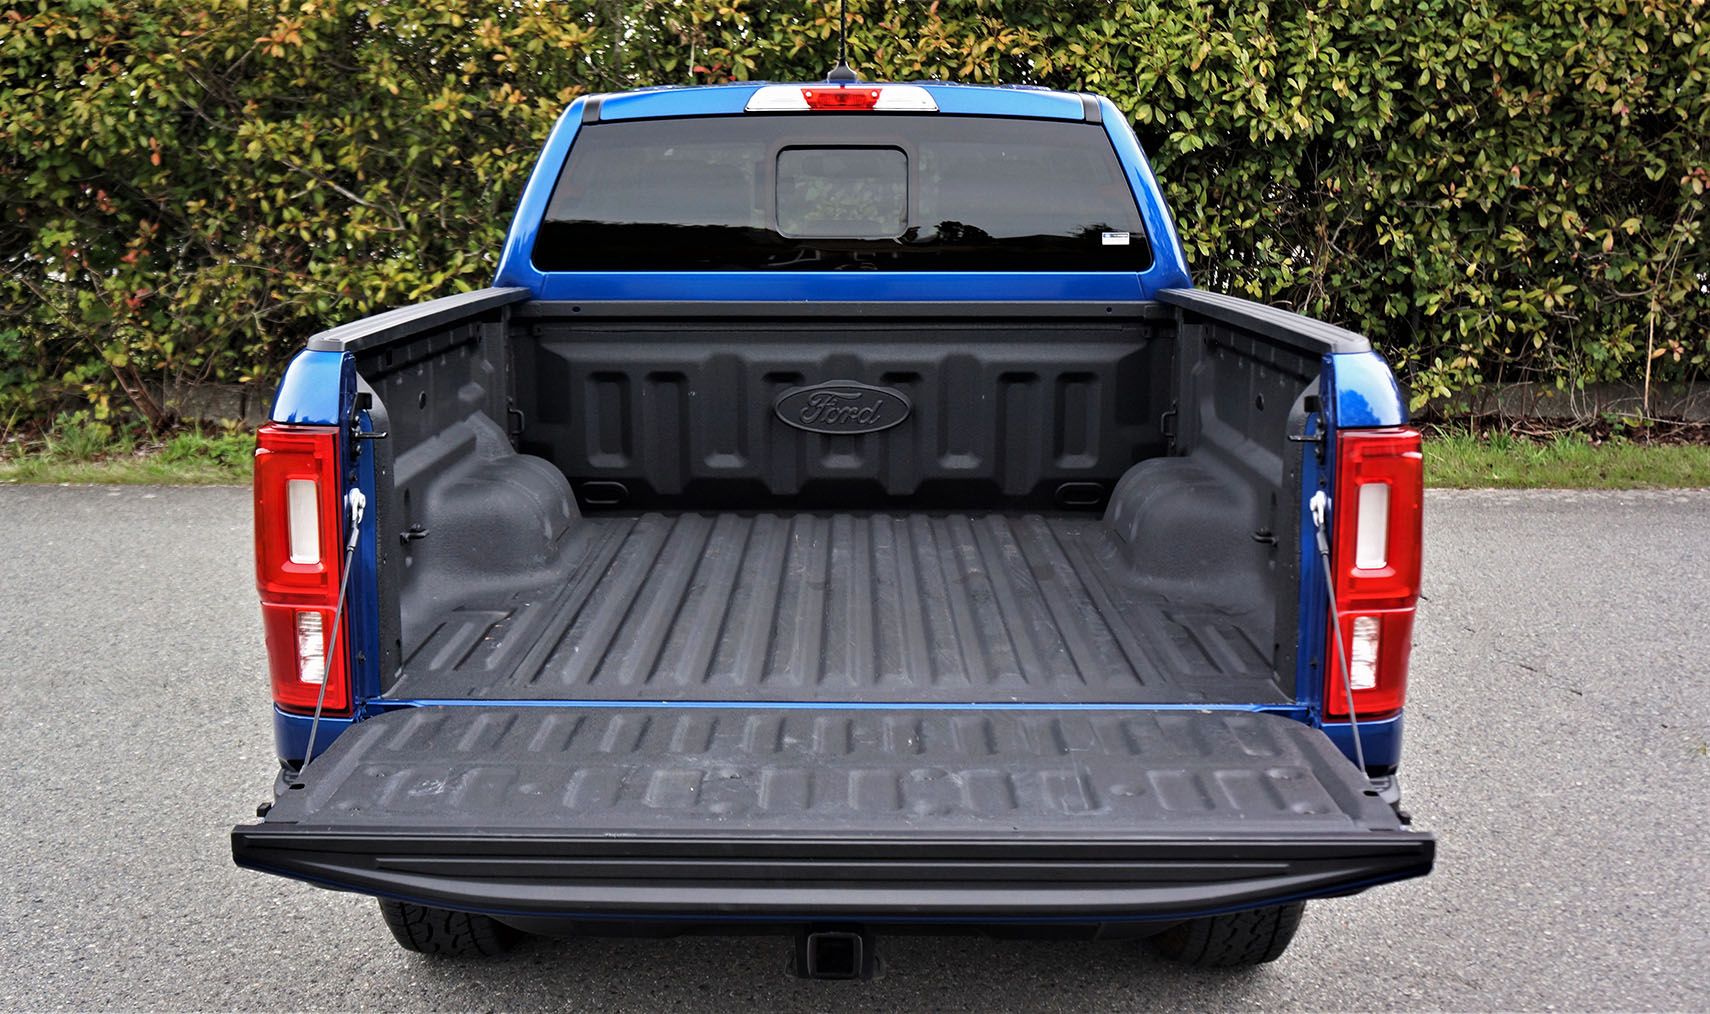 2020 Ford Ranger XLT SuperCrew 5-foot box shown with available drop-in bedliner.